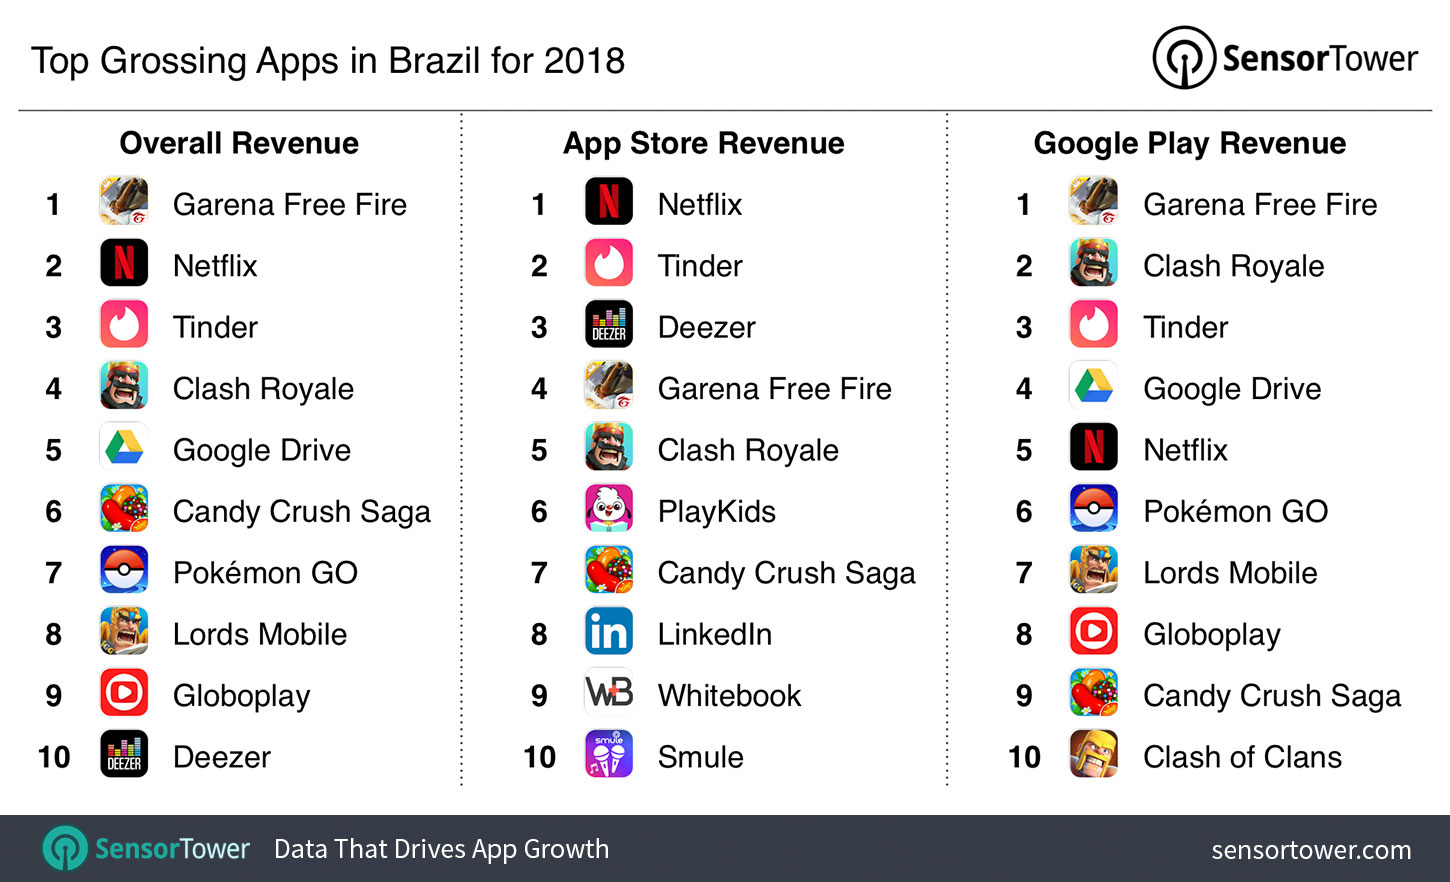 Dollar to Brazilian Real - Apps on Google Play